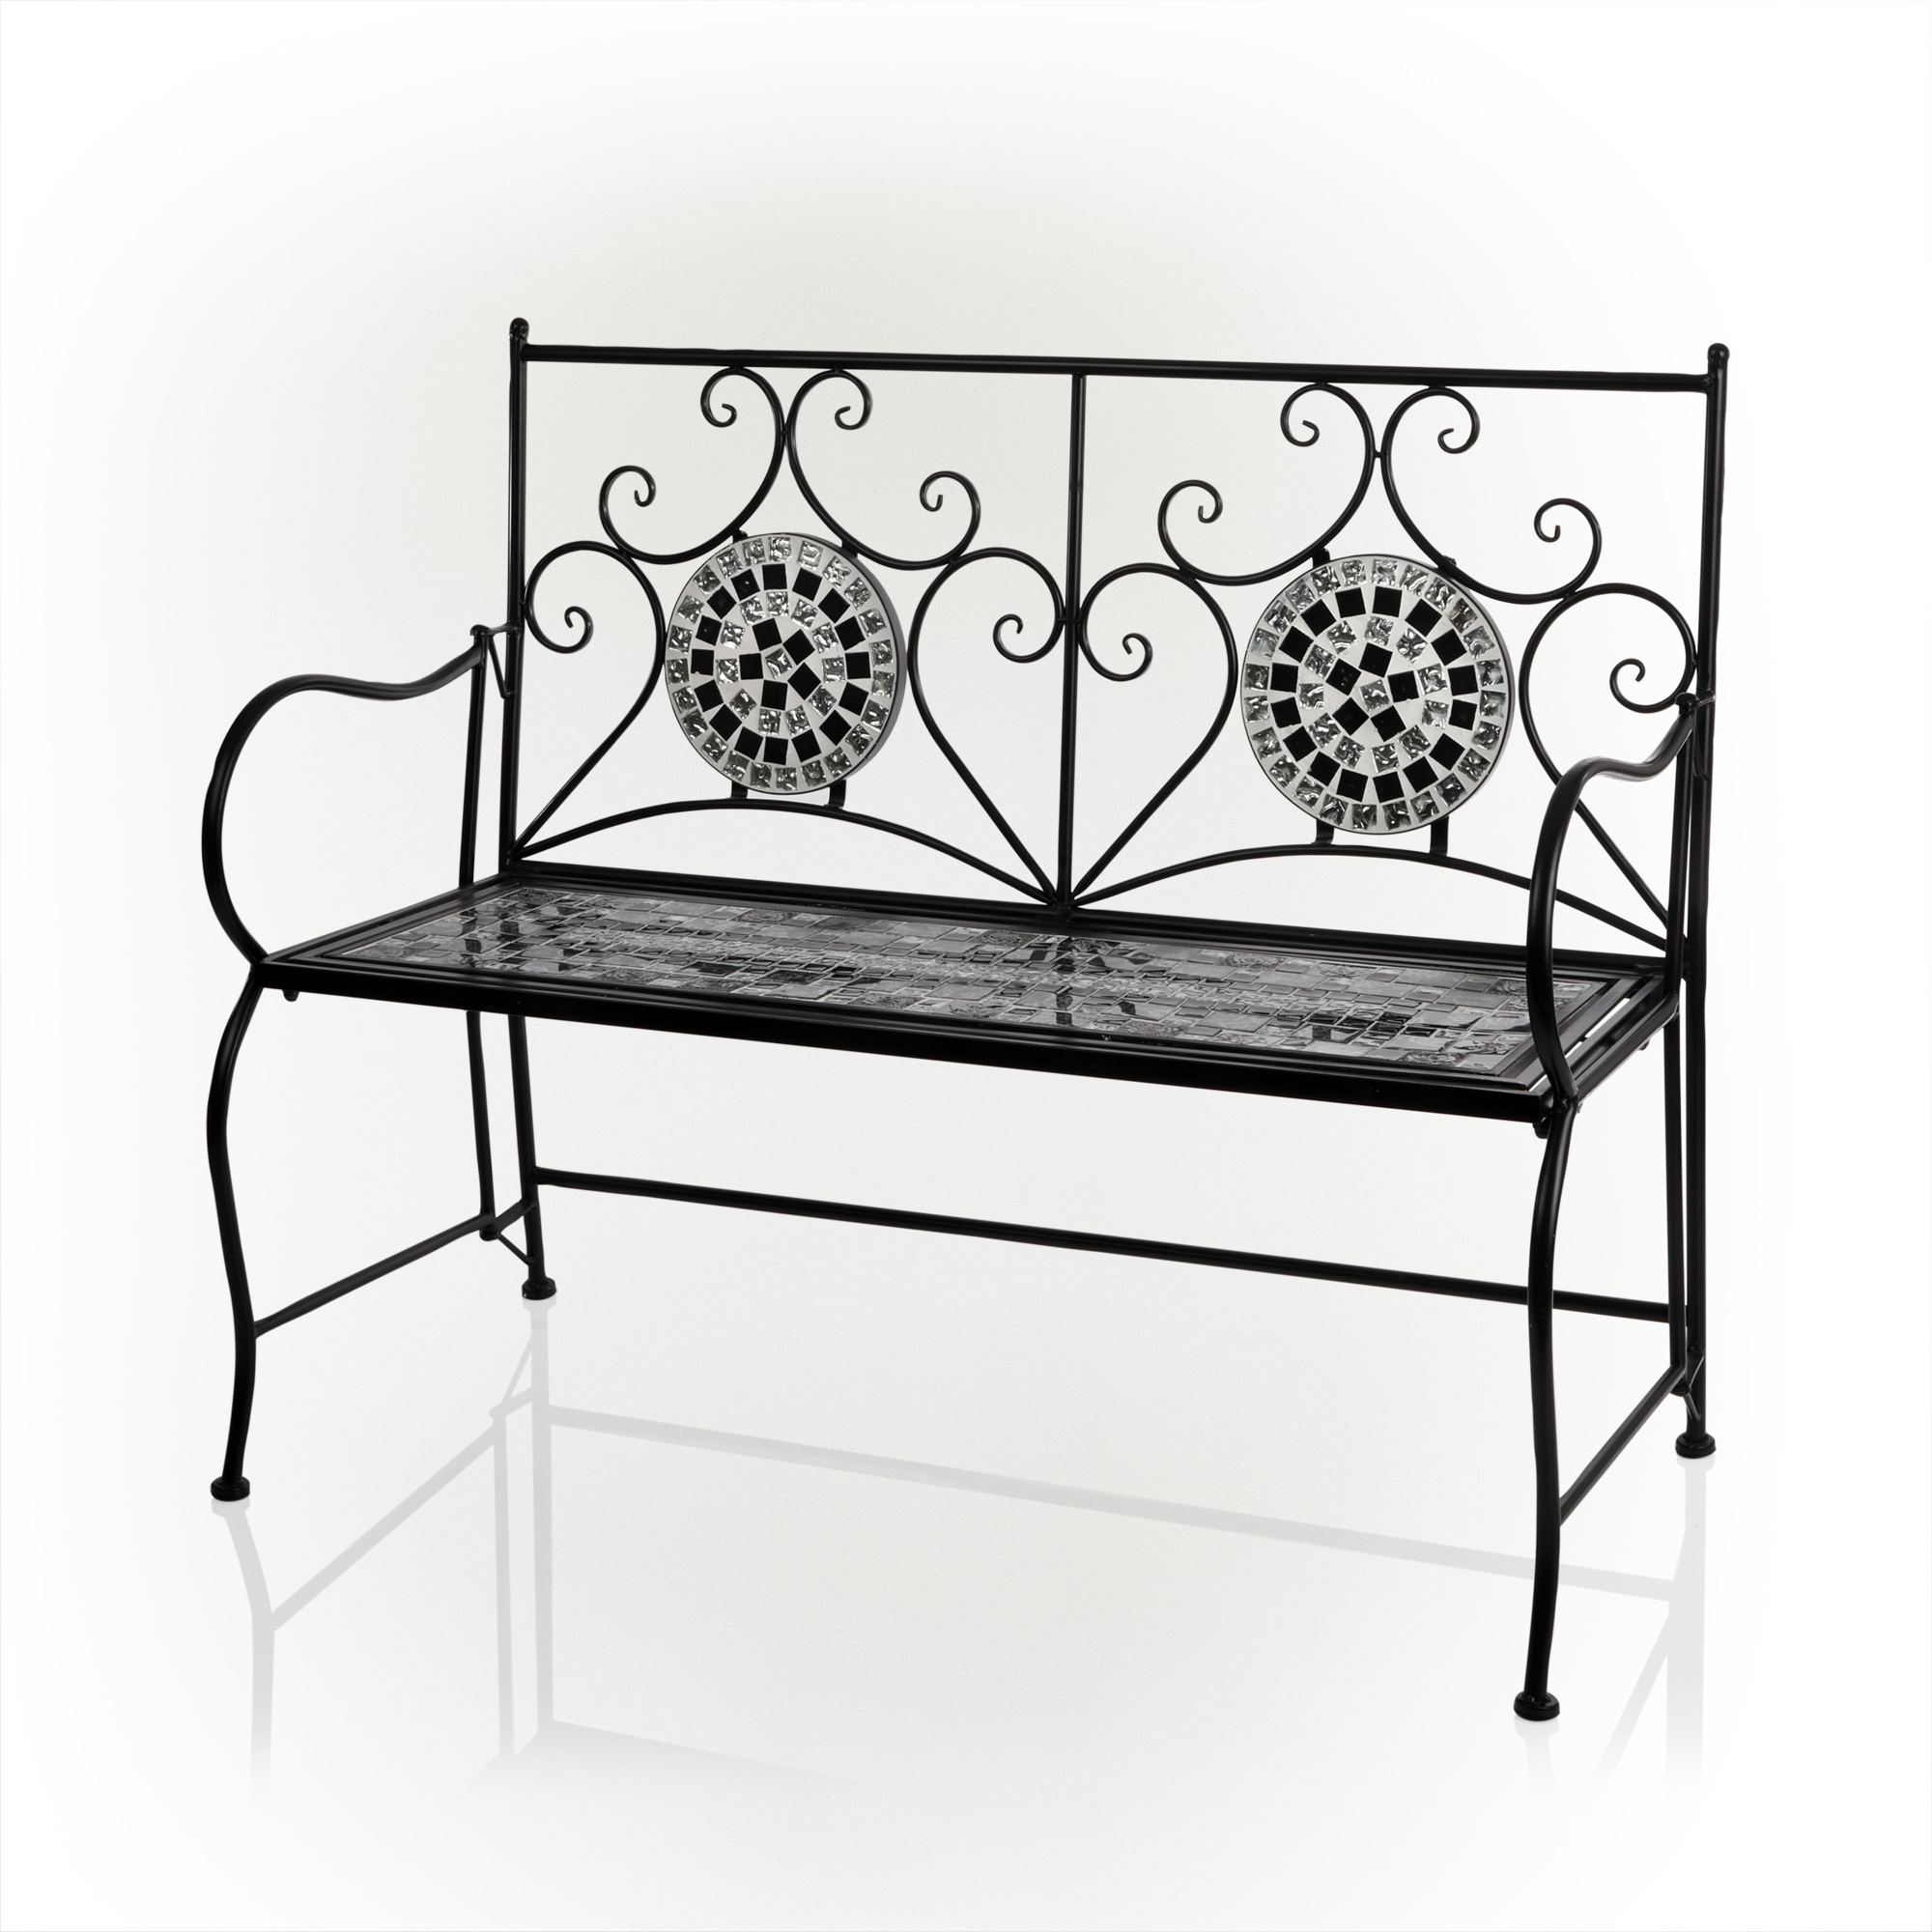 Alpine Corporation, Marbled Glass Mosaic Garden Bench,Black and Gray, Primary Color Multi, Material Multiple, Width 23 in, Model MJK172